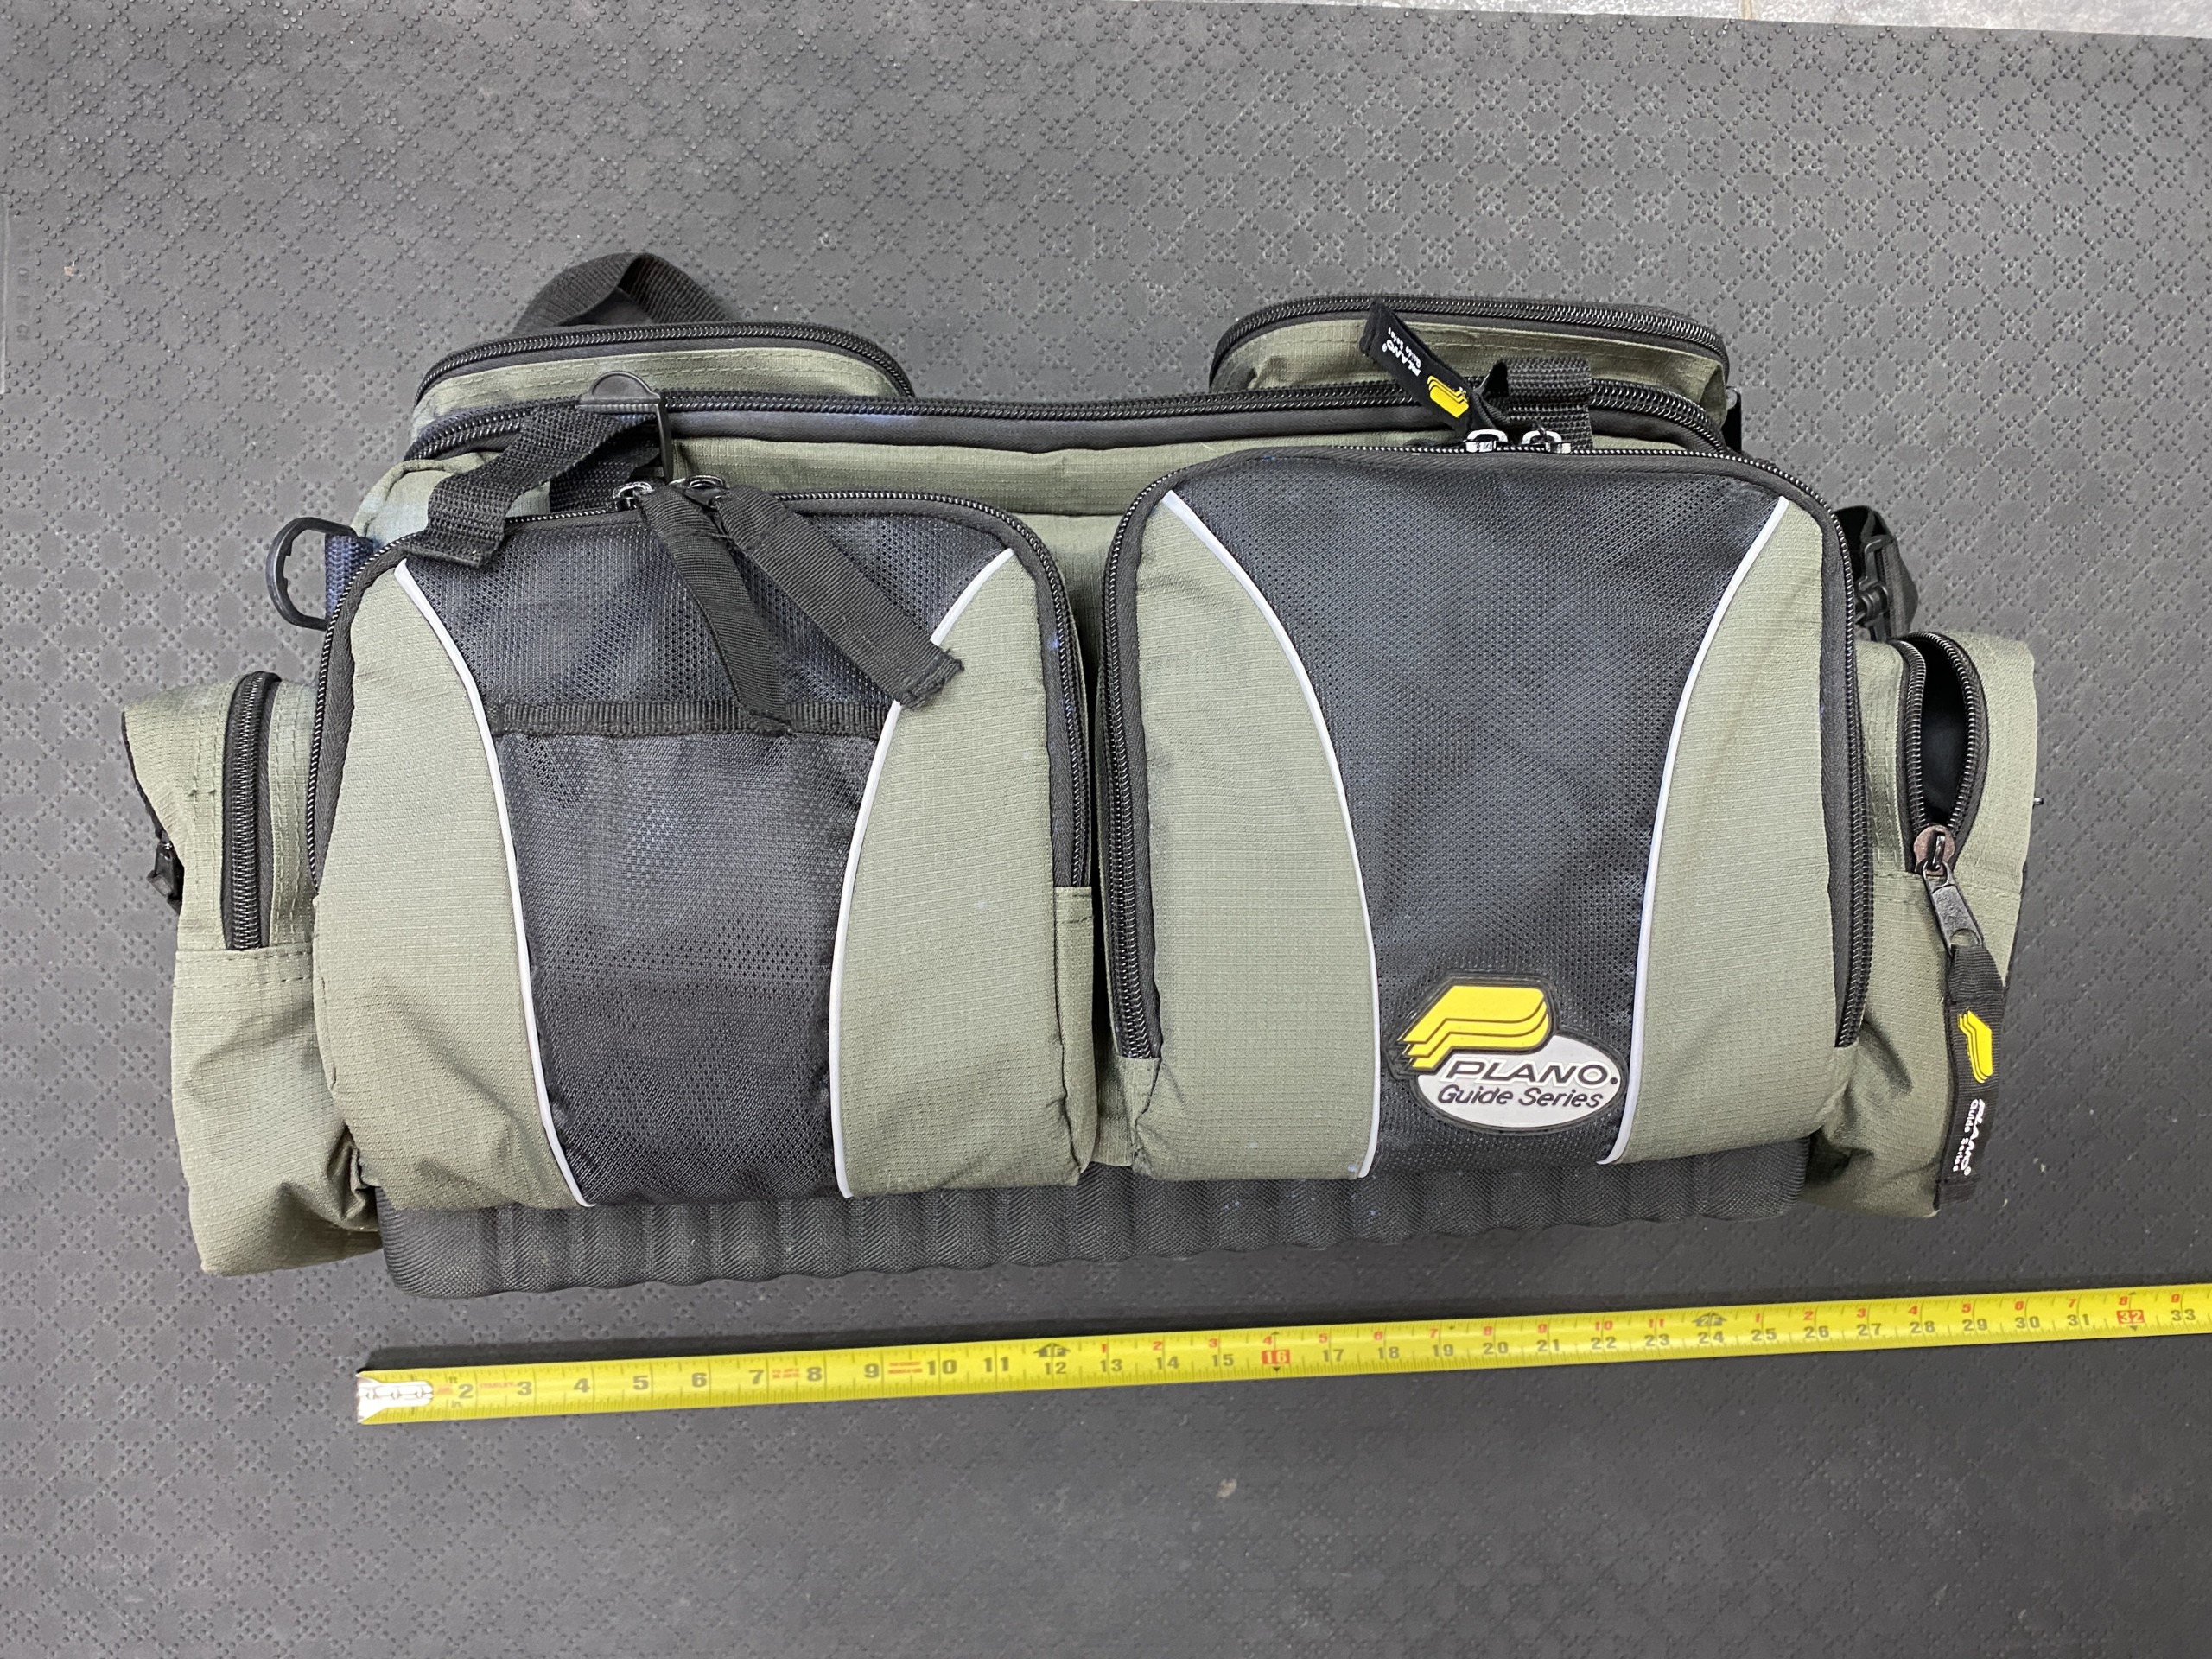 SOLD! – NEW PRICE! – Plano 3700 Soft Sided Tackle Bag – A Little